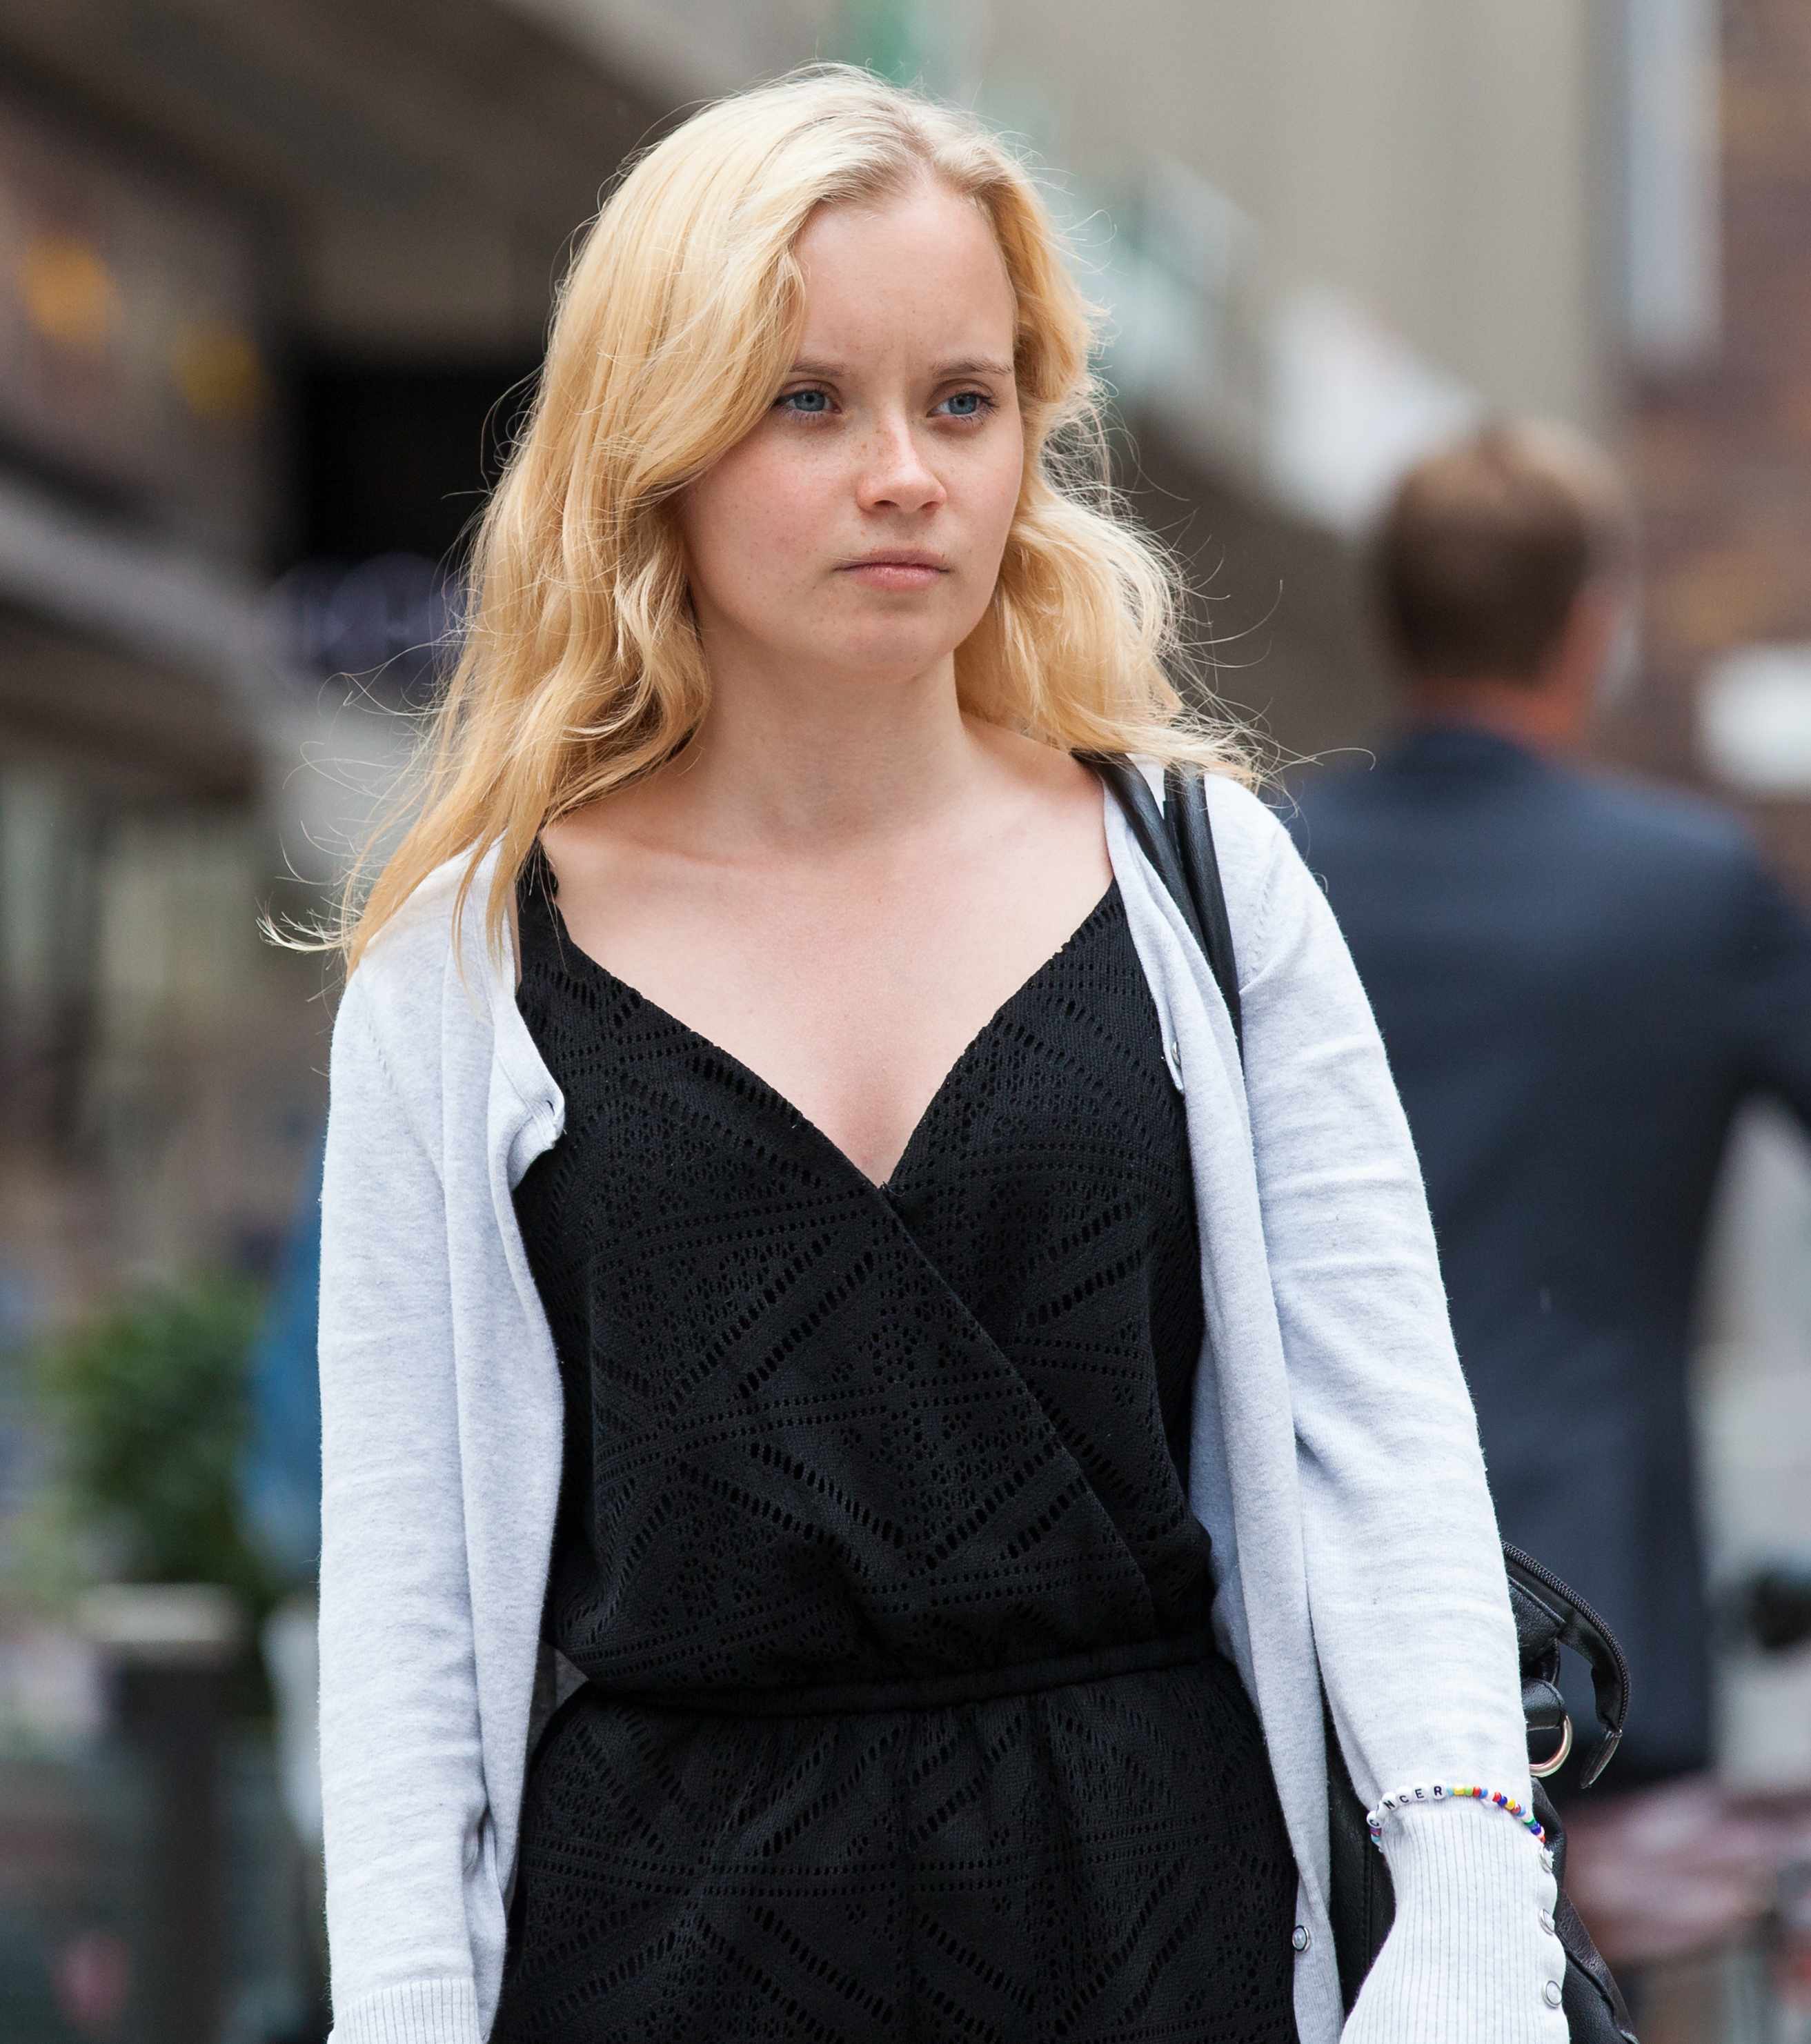 a cute blond girl photographed in Stockholm, Sweden in June 2014, picture 11/26